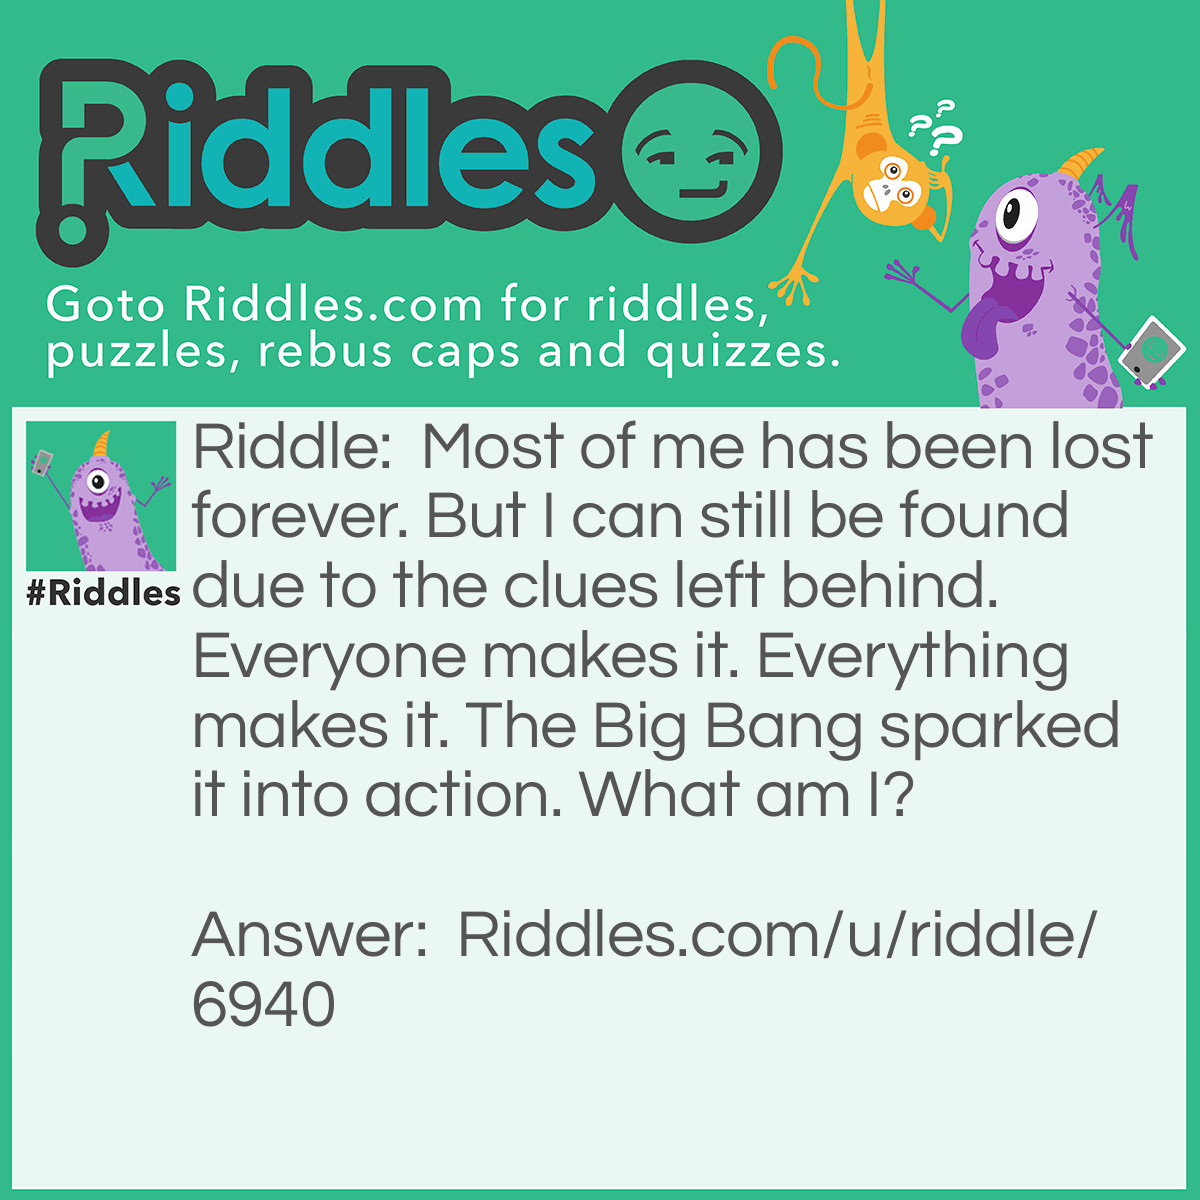 Riddle: Most of me has been lost forever. But I can still be found due to the clues left behind. Everyone makes it. Everything makes it. The Big Bang sparked it into action. What am I? Answer: History.